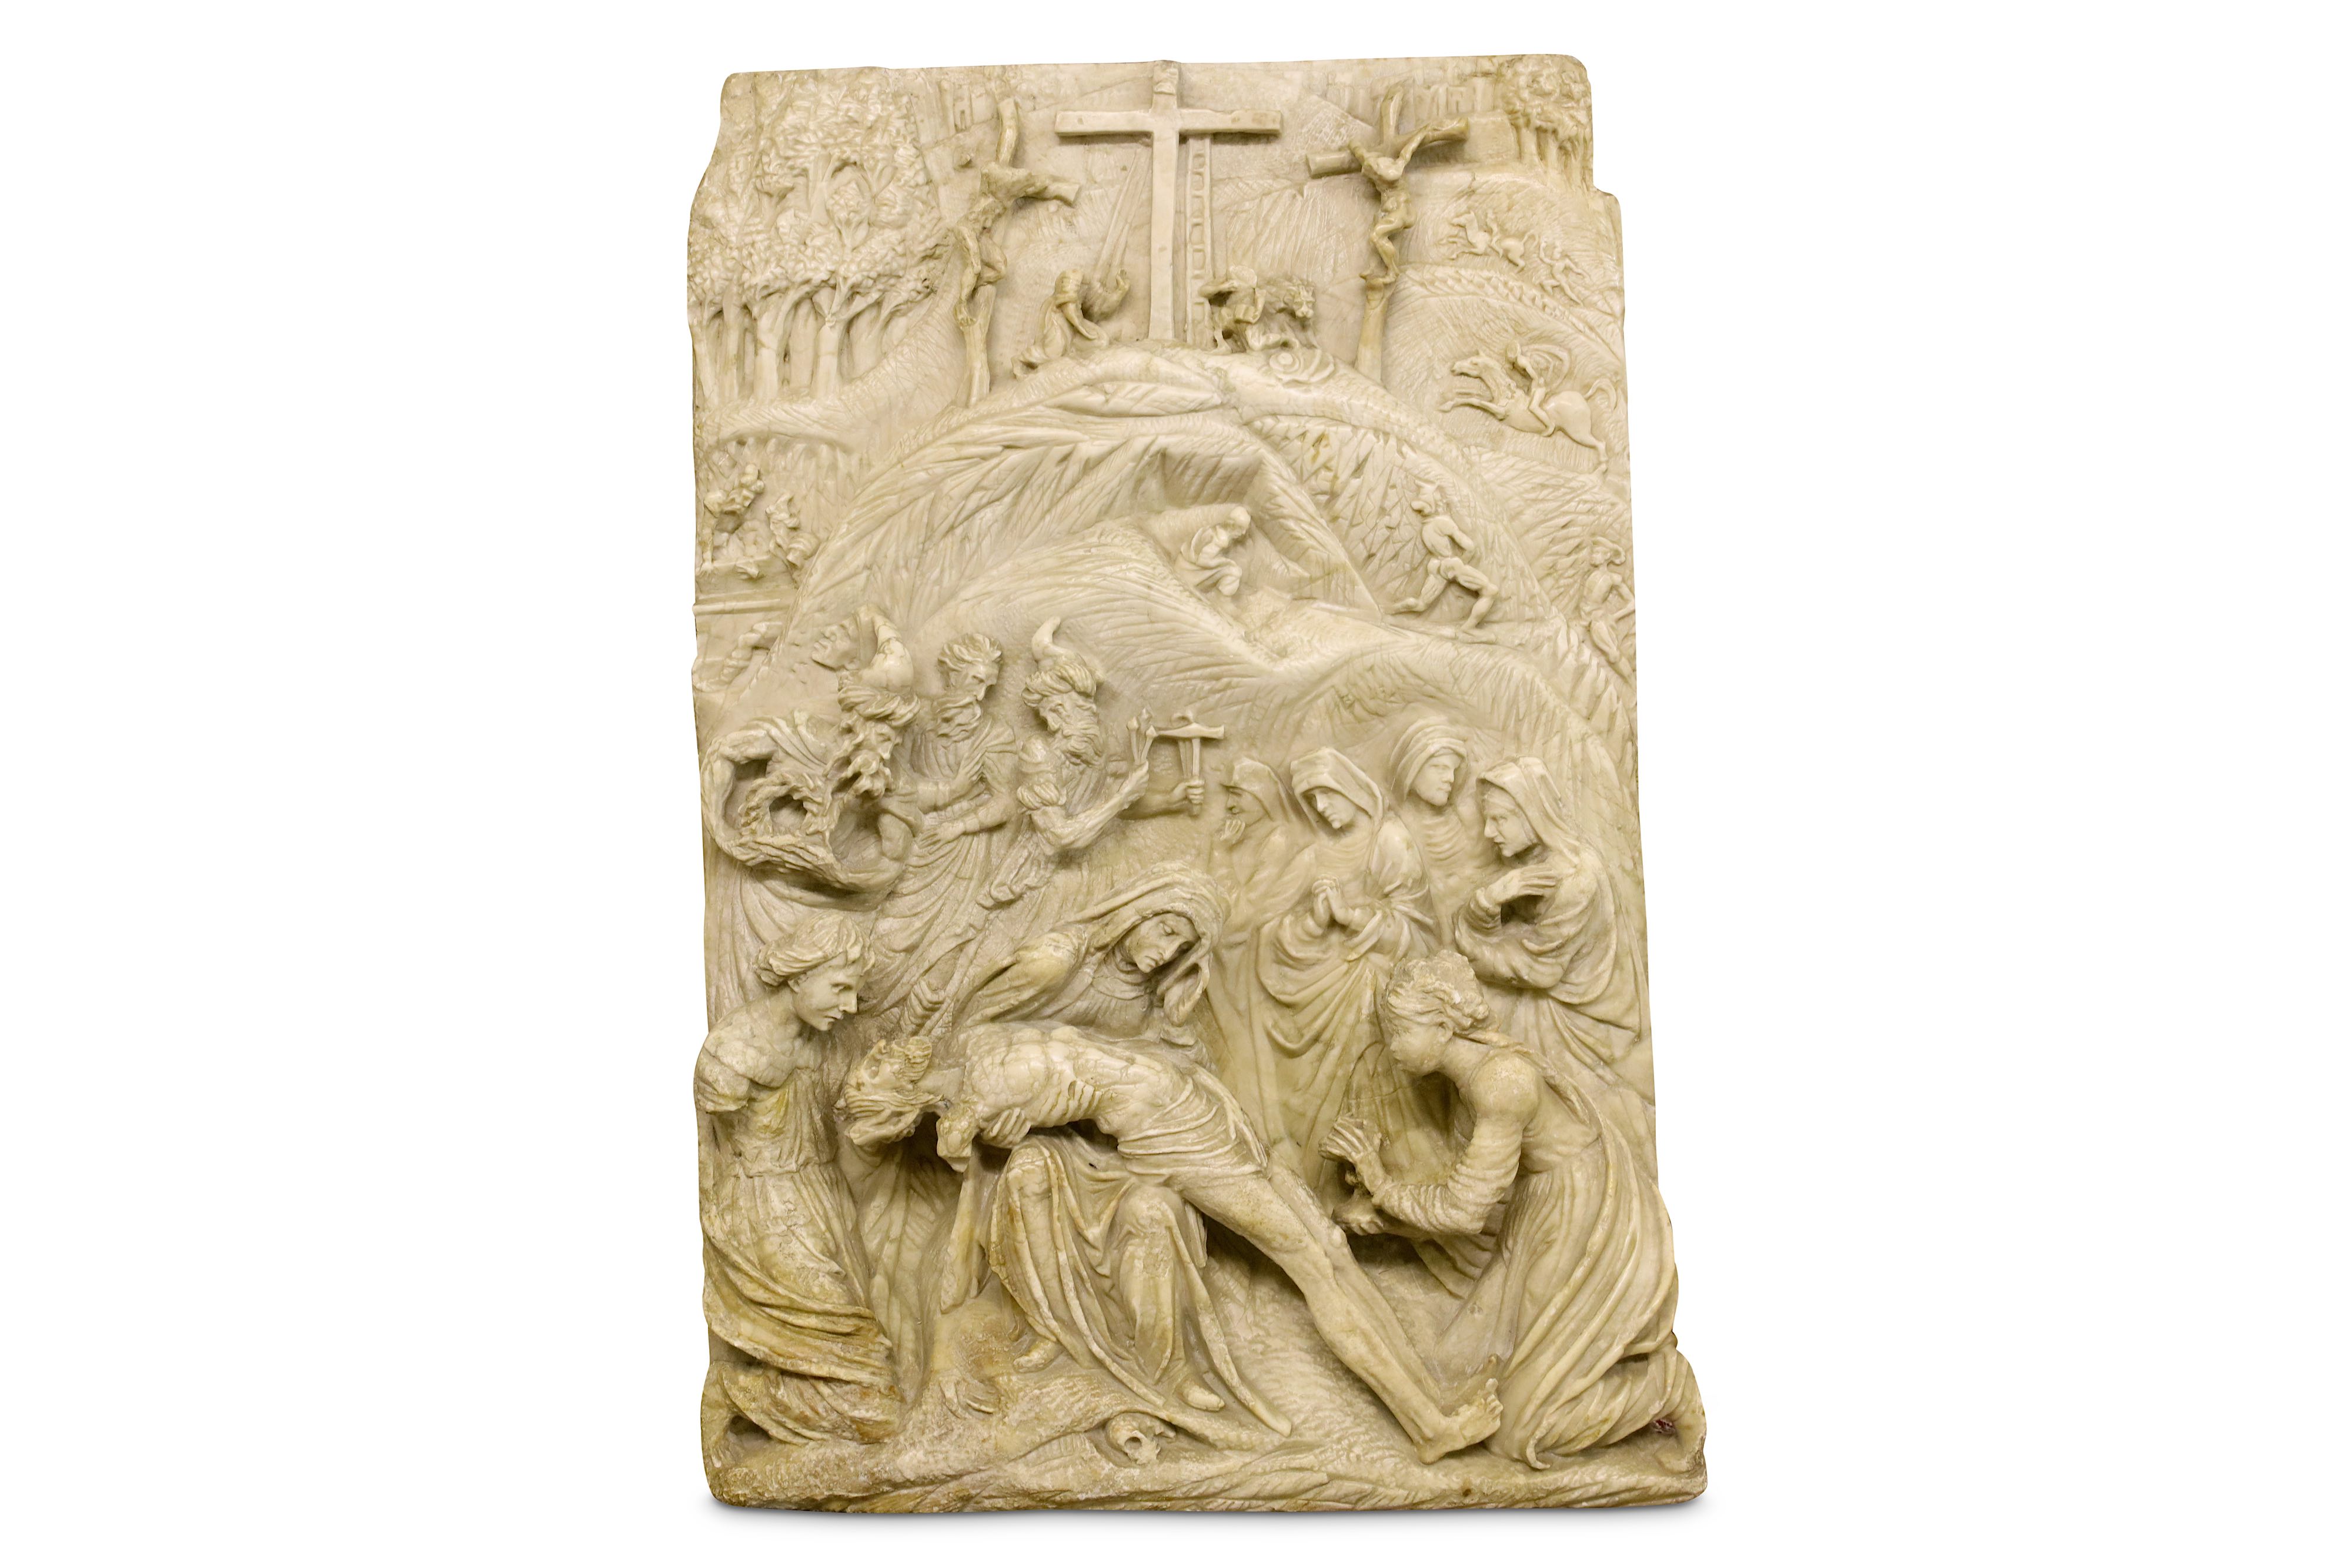 A RARE AND IMPORTANT FIRST HALF OF THE 16TH CENTURY GERMAN ALABASTER RELIEF DEPICTING THE PIETA